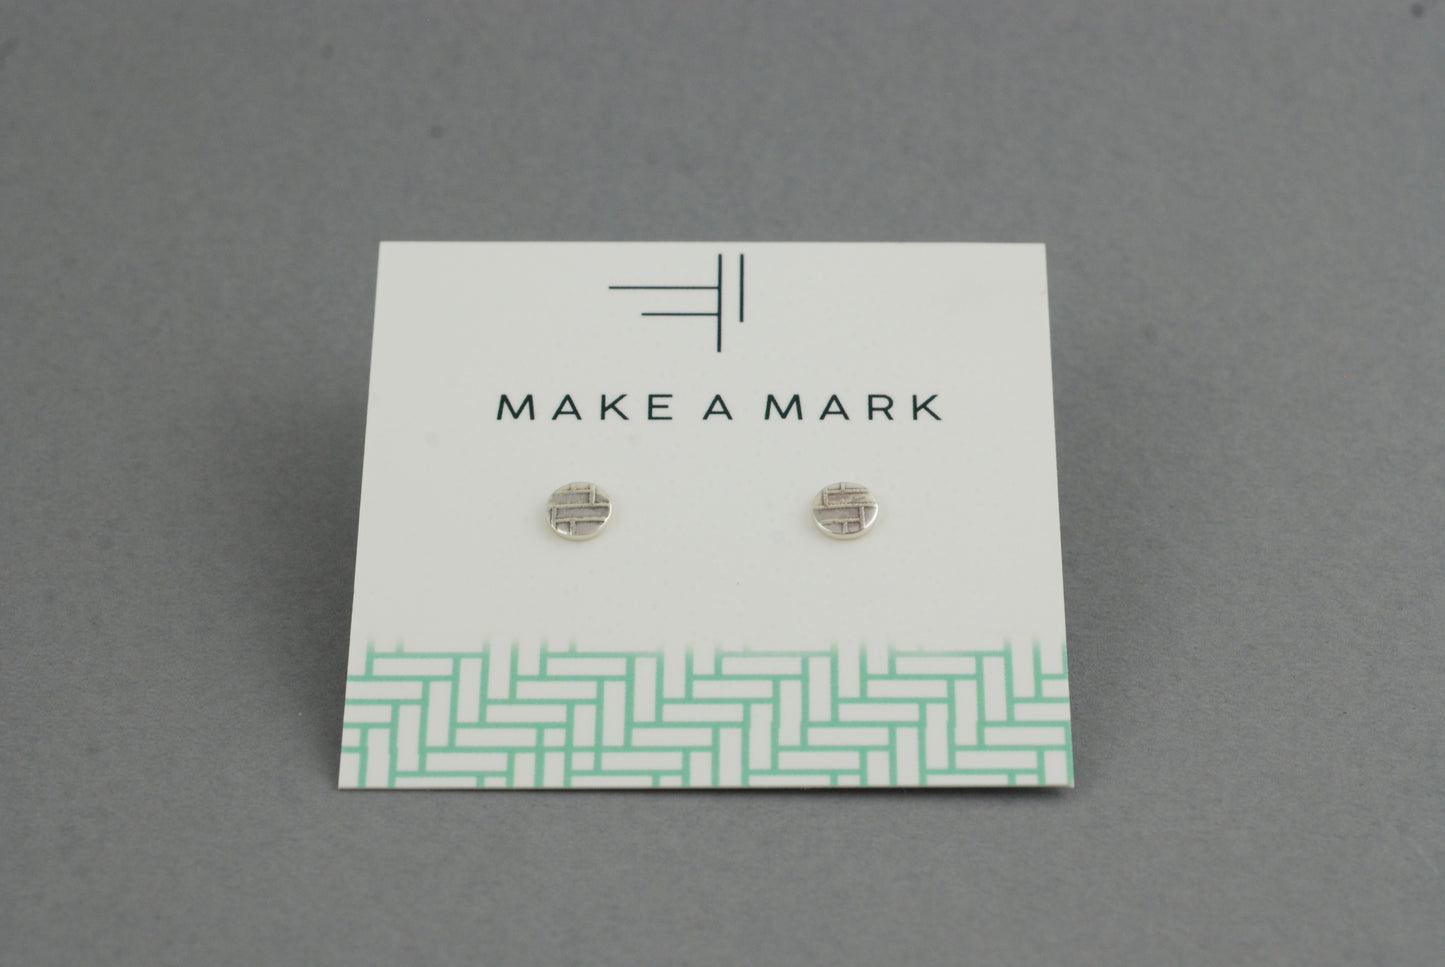 Sterling Silver Circle studs with Woven Textures